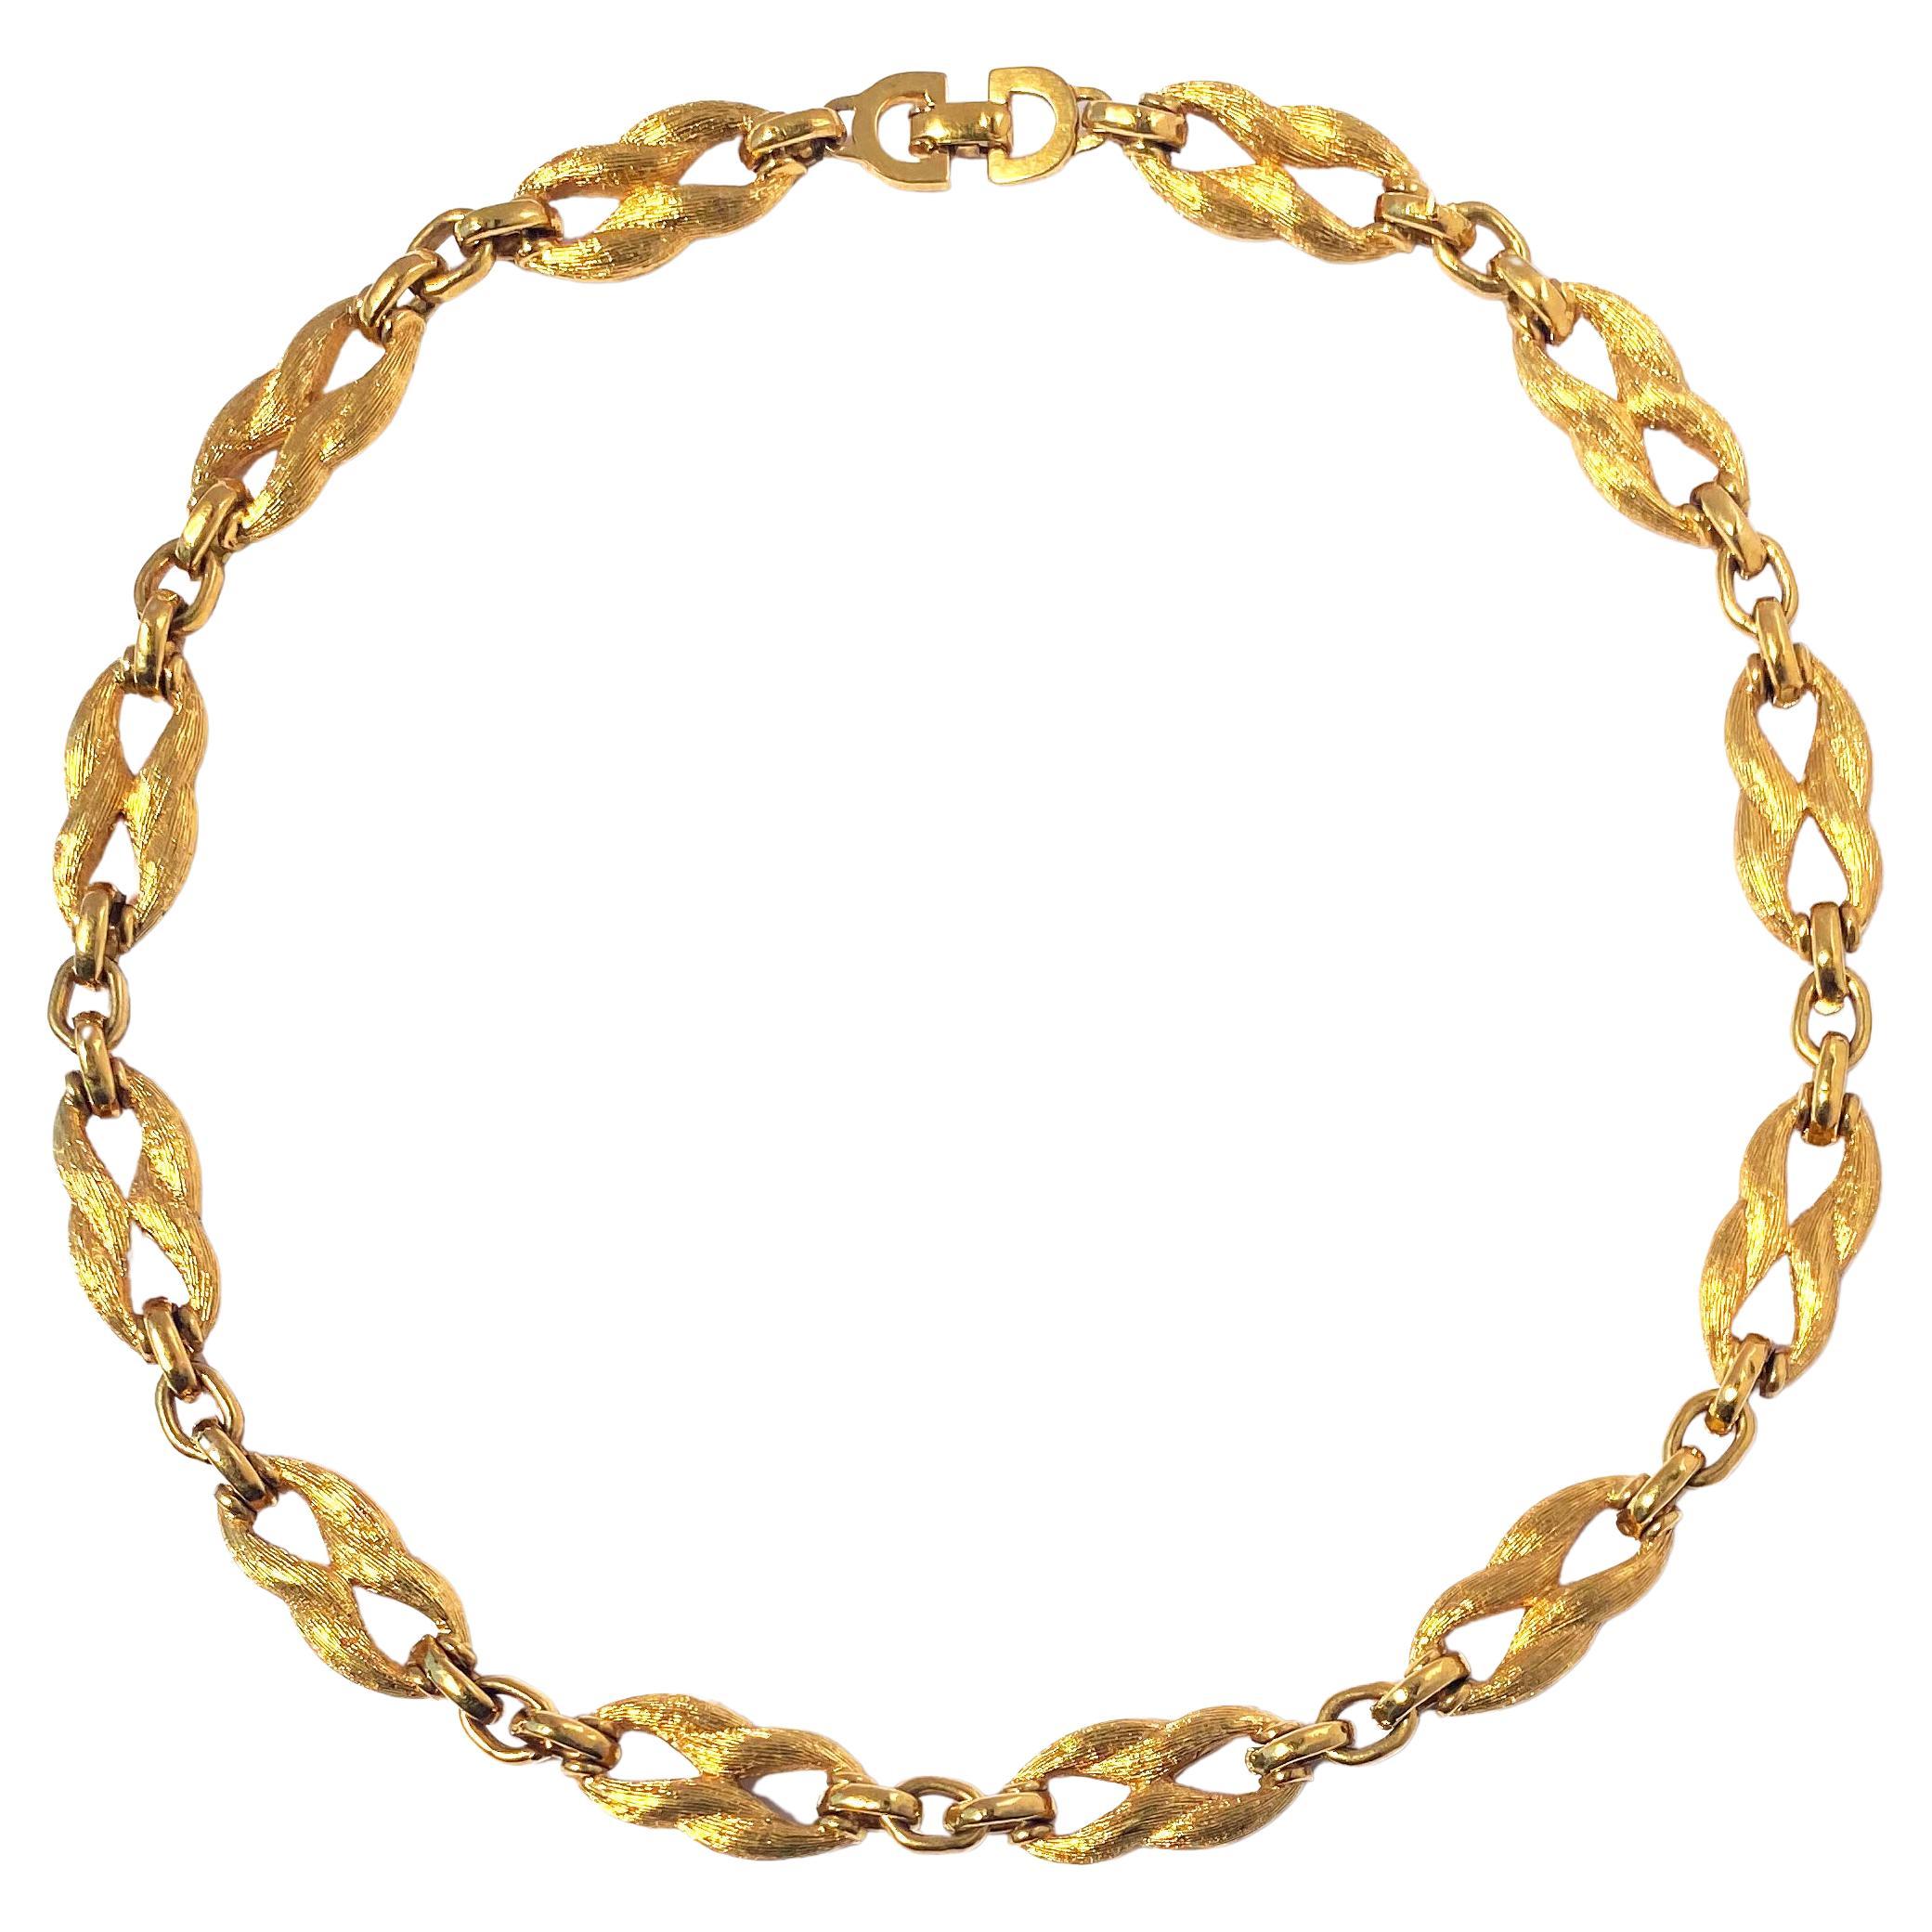 Vintage Christian Dior Figure 8 Chain Link Necklace, 1960s For Sale